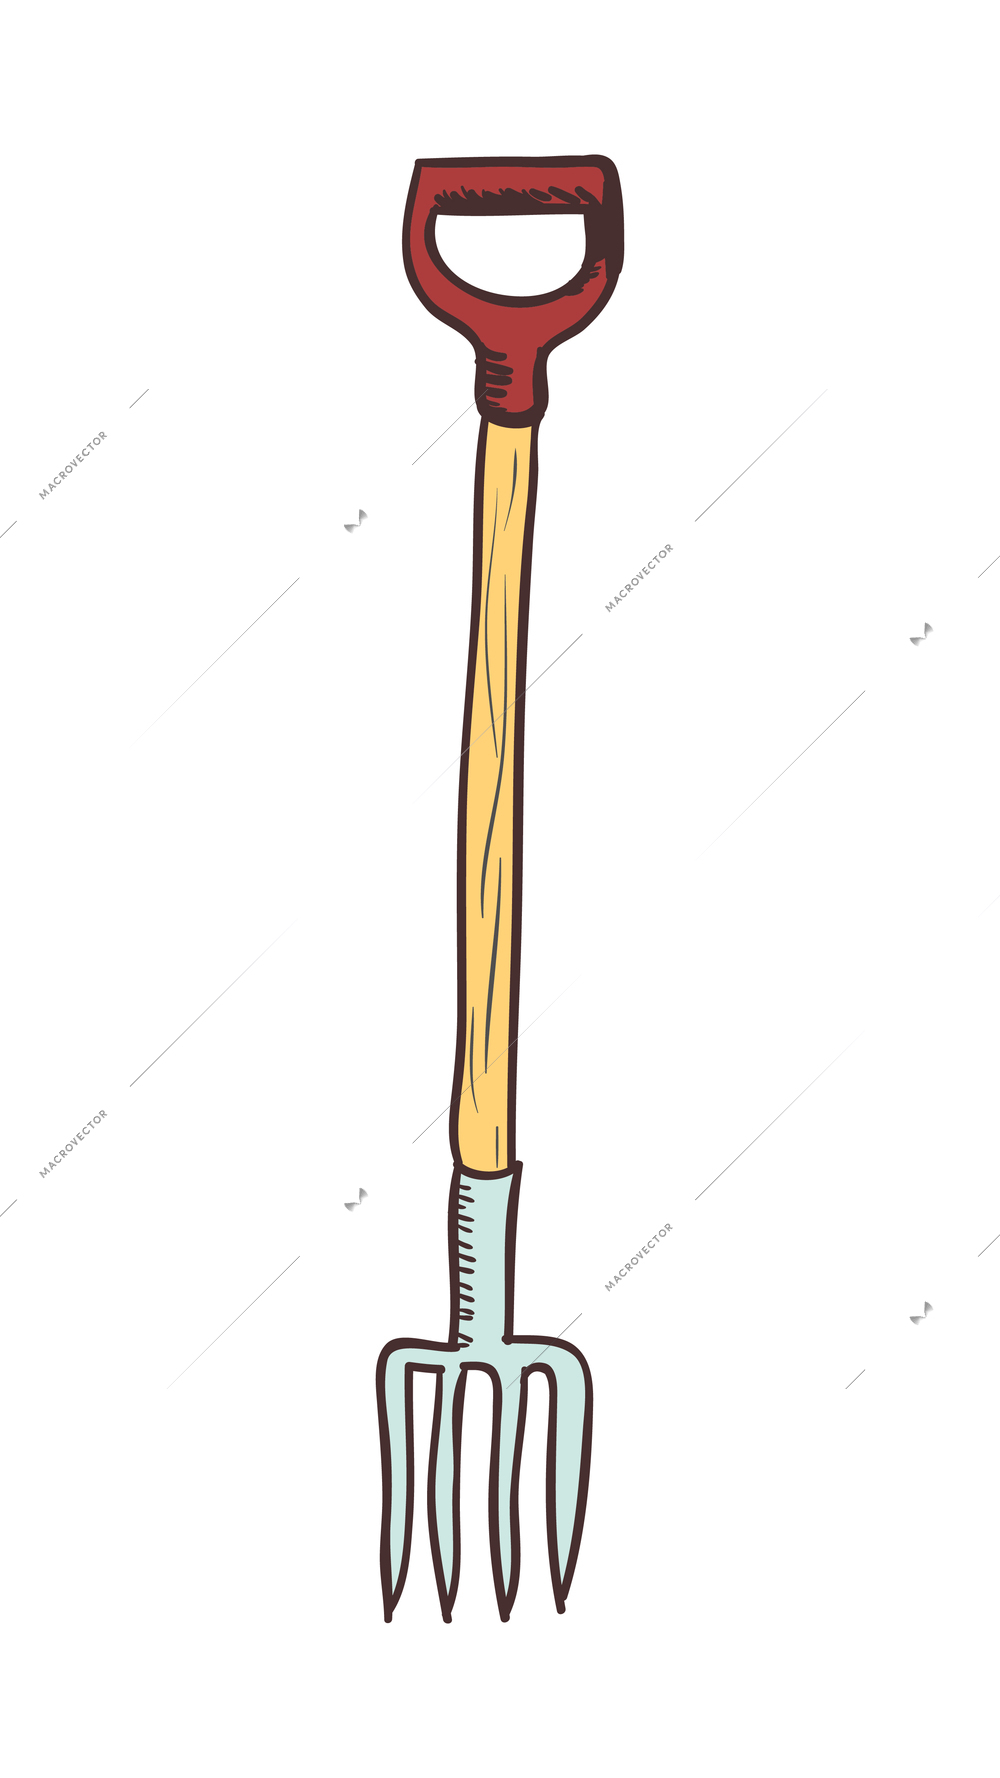 Hand drawn gardening tool icon with pitchfork vector illustration